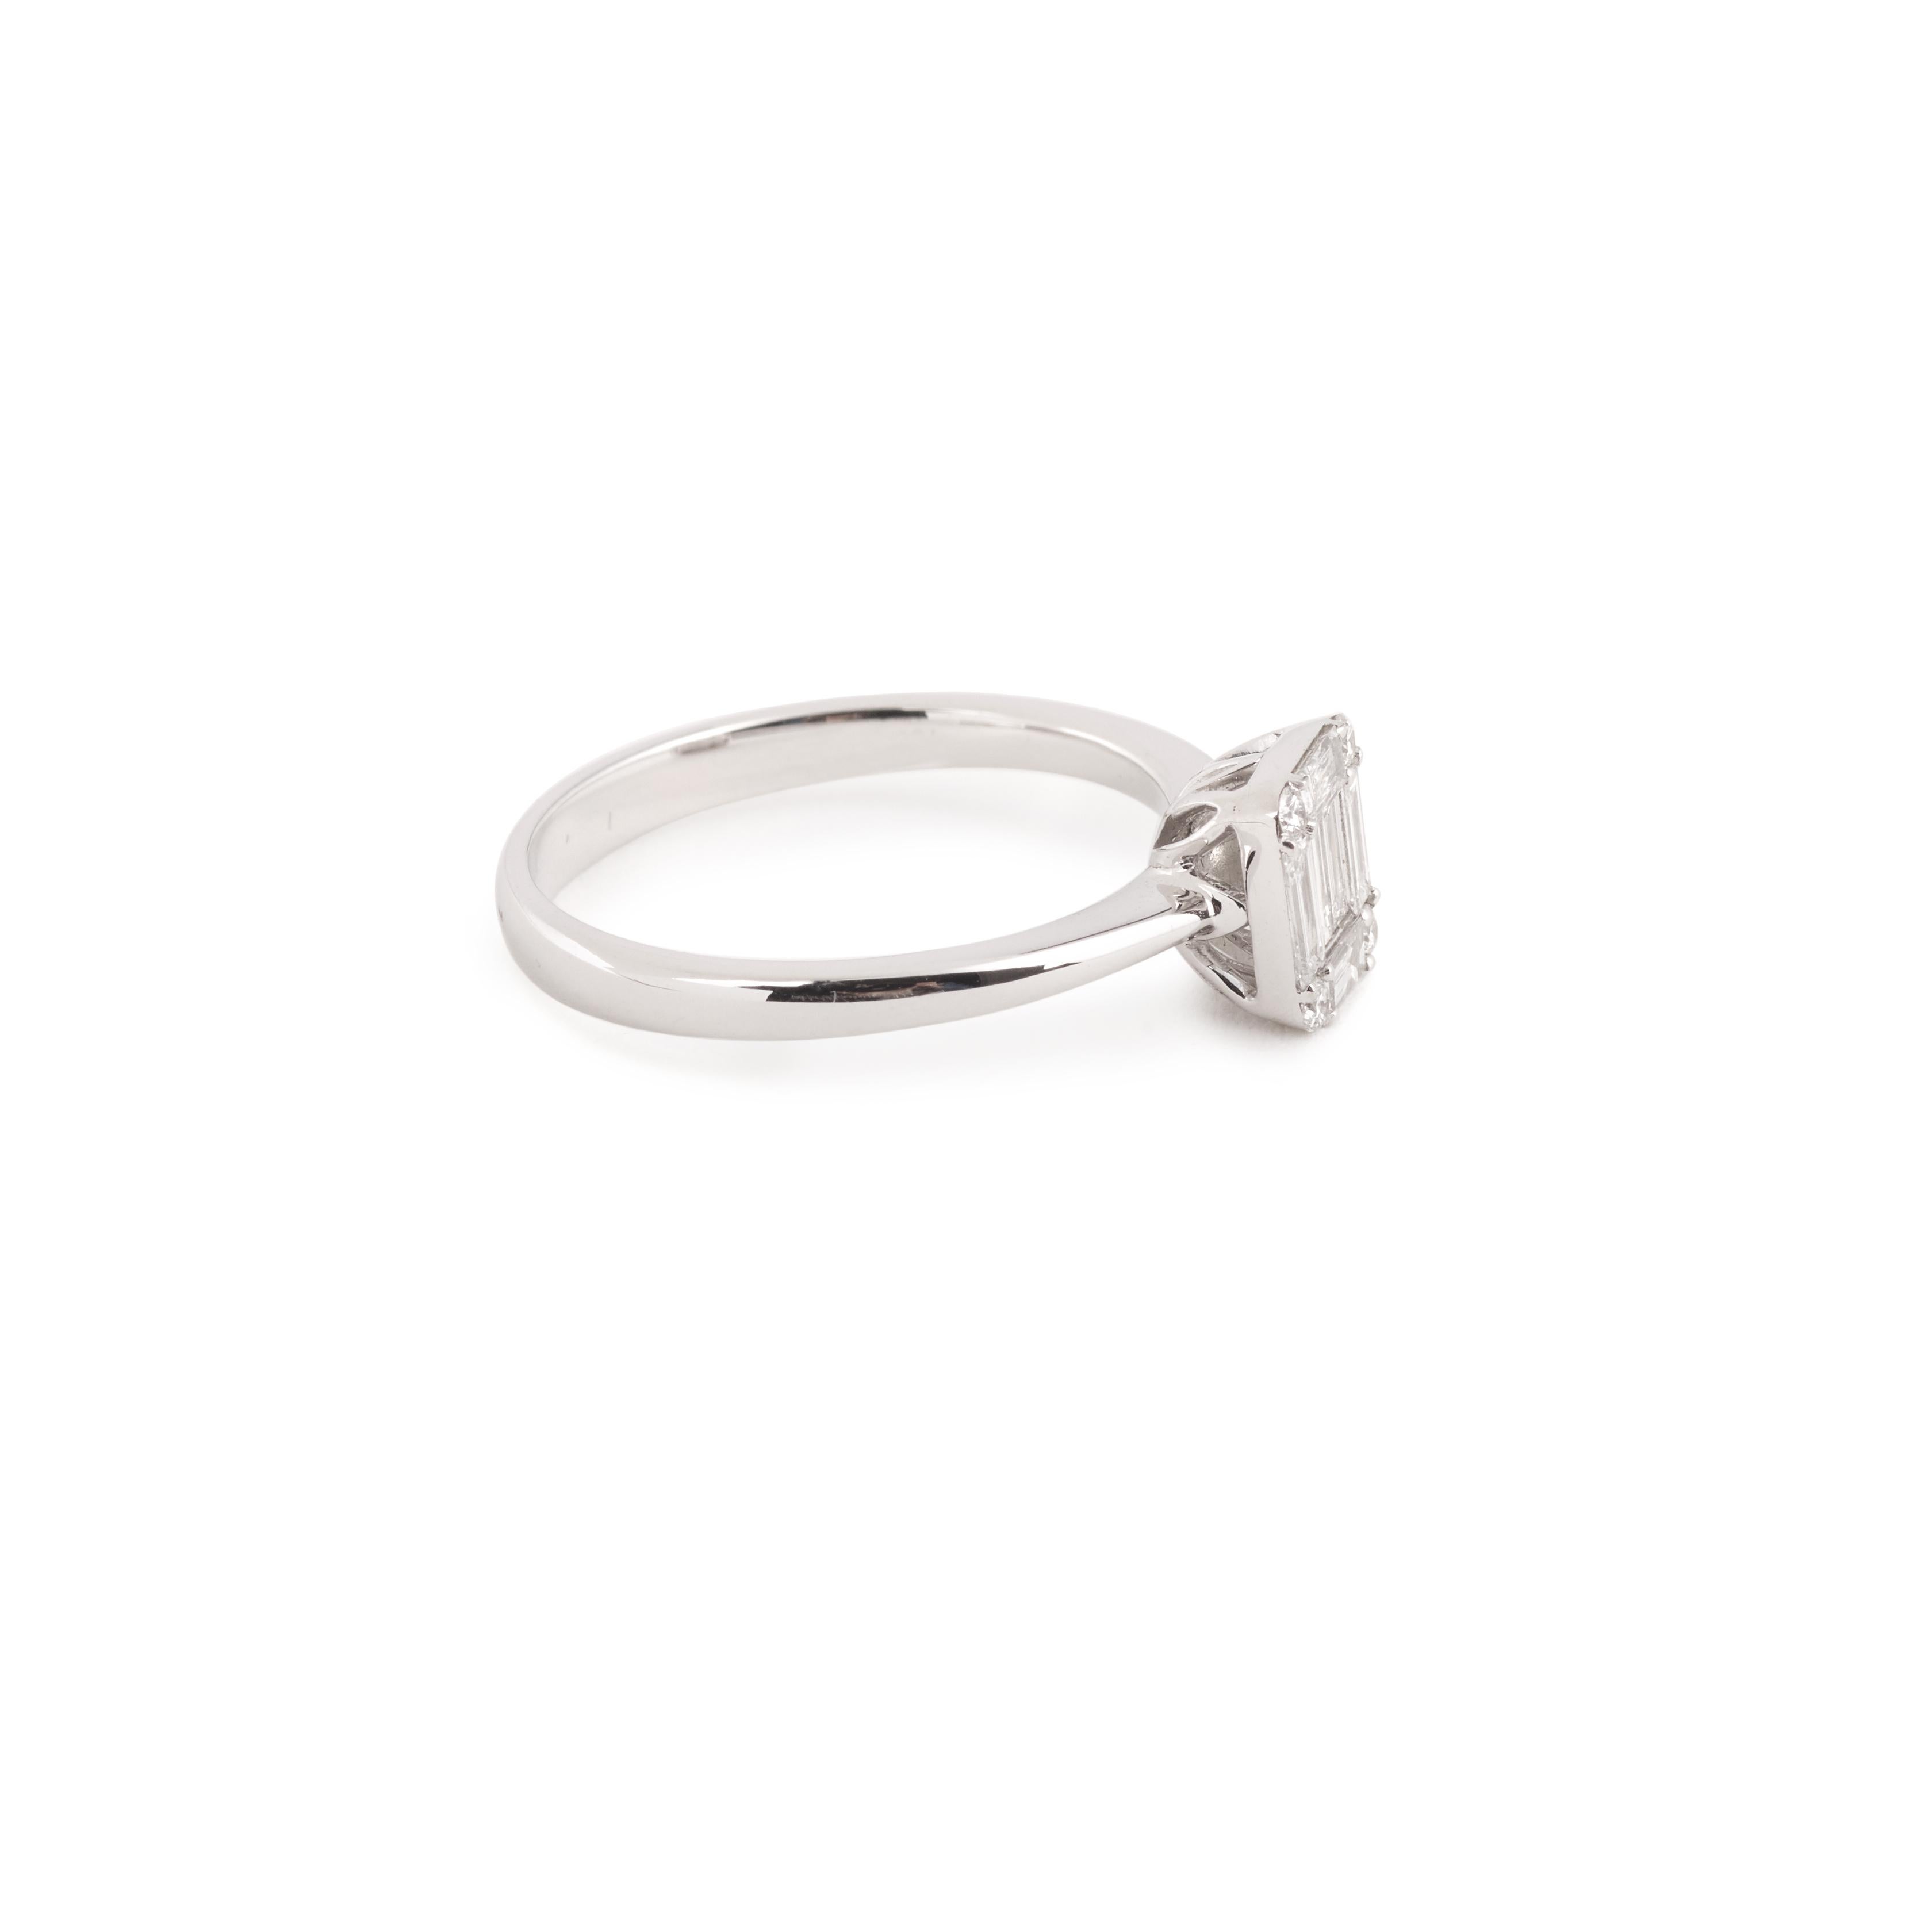 Emerald cut effect ring in white gold set with baguette and brilliant-cut diamonds.

Total diamond weight: 0.40 carats

Dimensions: 7.22 × 6.55 × 5.5 mm ( 0.28 X 0.25 X 0.22 inches)

Finger size: 53 (US size: 6.5)

18 karat white gold,